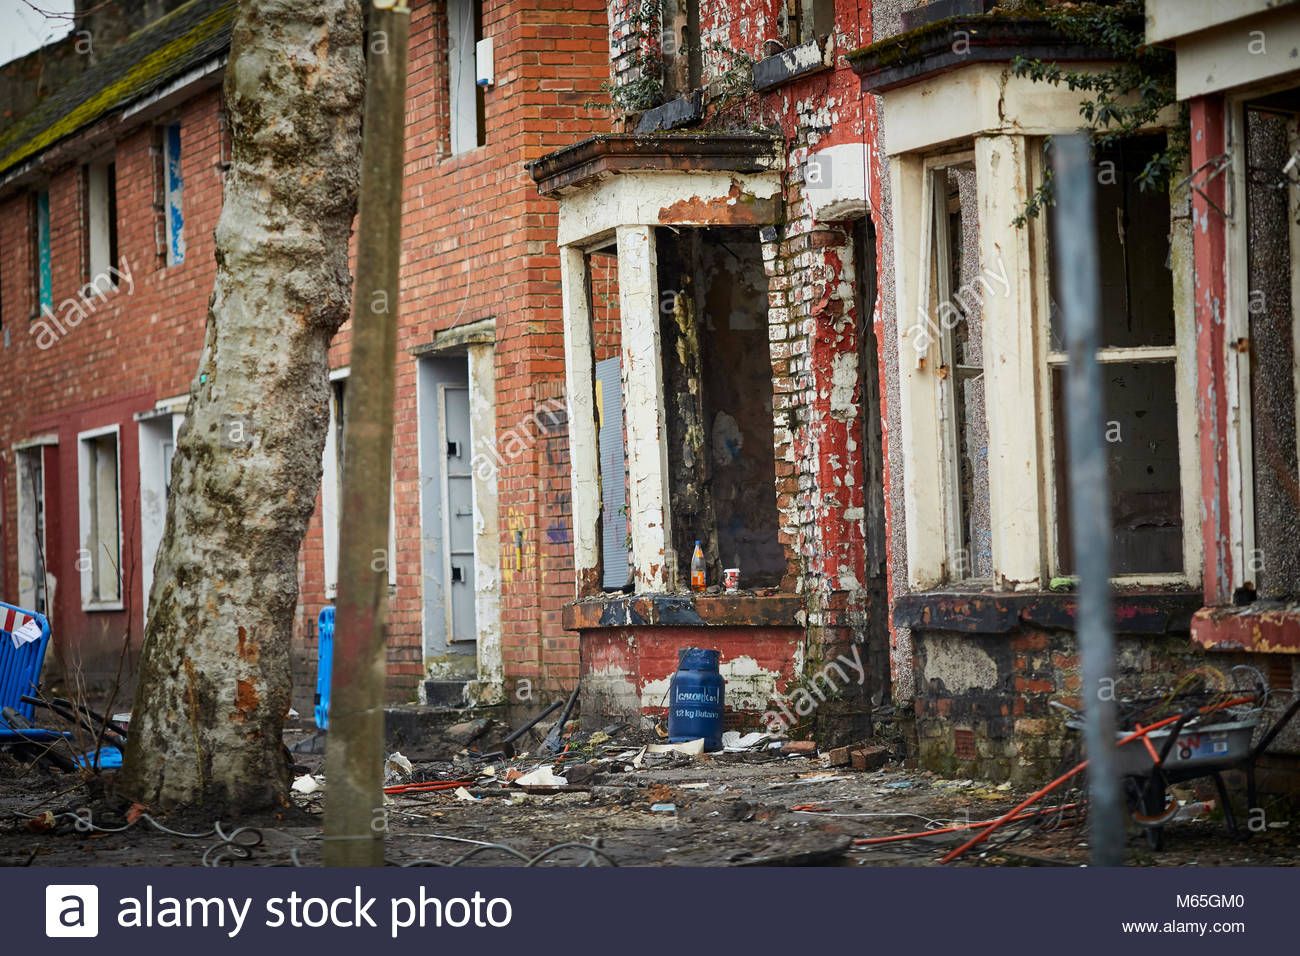 the-welsh-street-area-being-refurbished-terraced-houses-being-brought-M65GM0.jpg